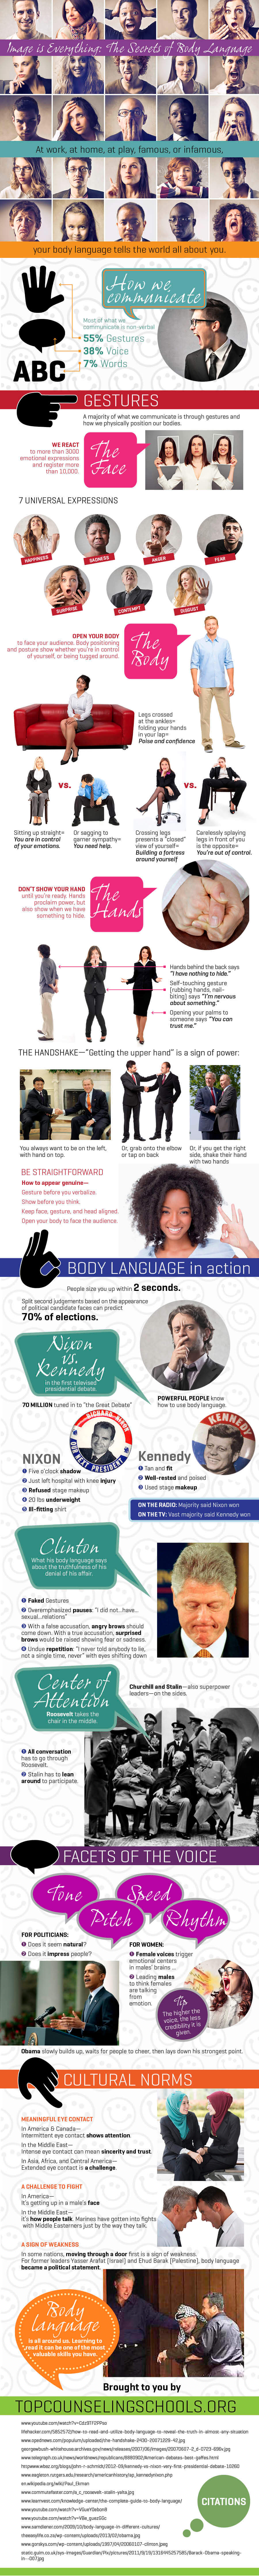 Image is Everything: The Secrets of Body Language